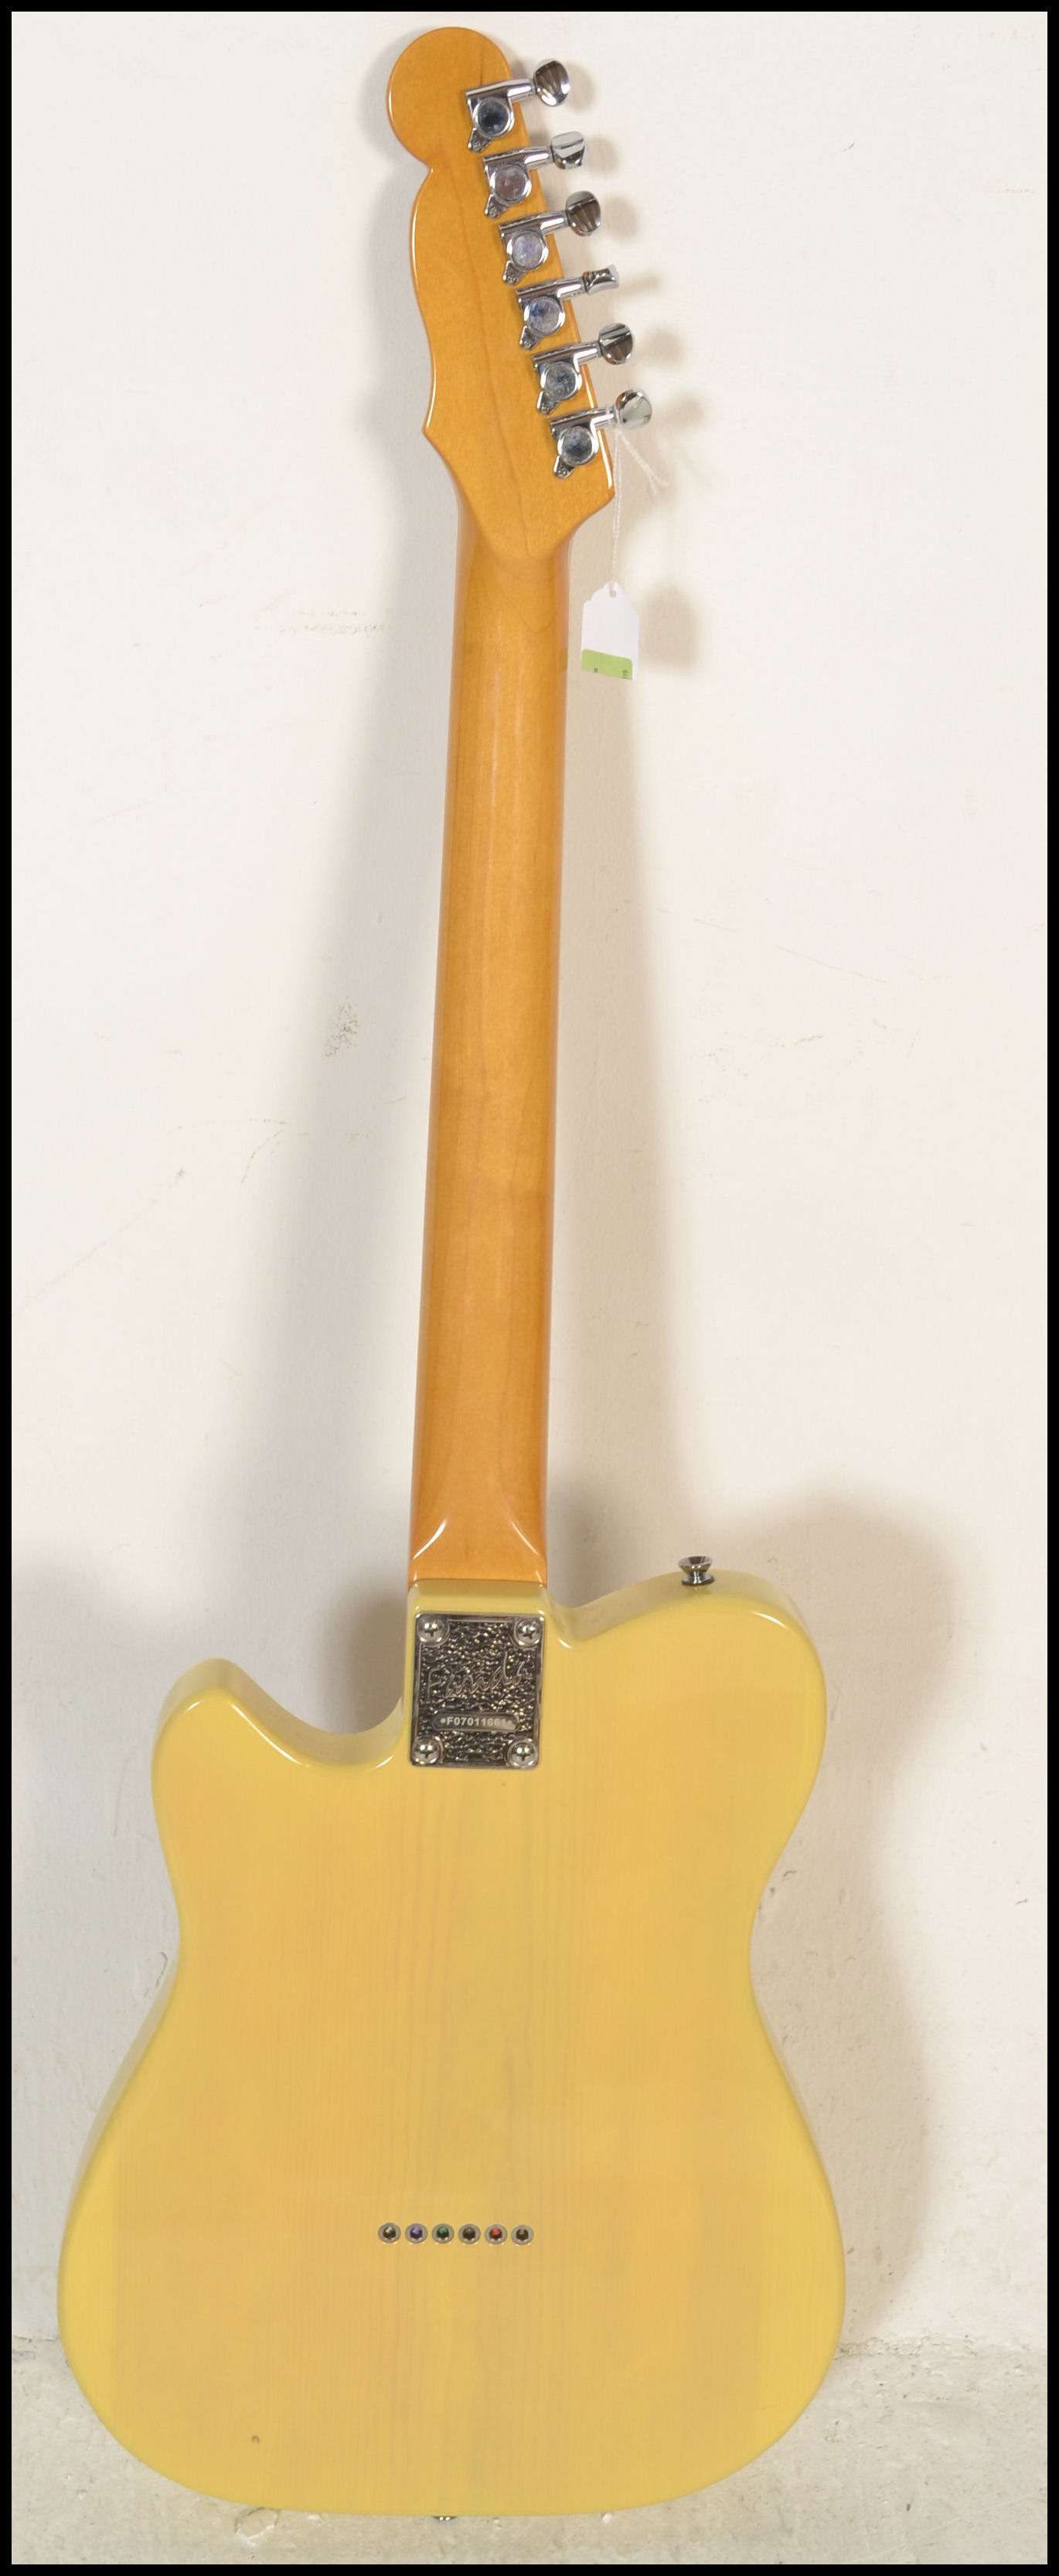 A six string electric guitar Telecaster style by Forida having maple neck and chrome tuning pegs - Image 4 of 5